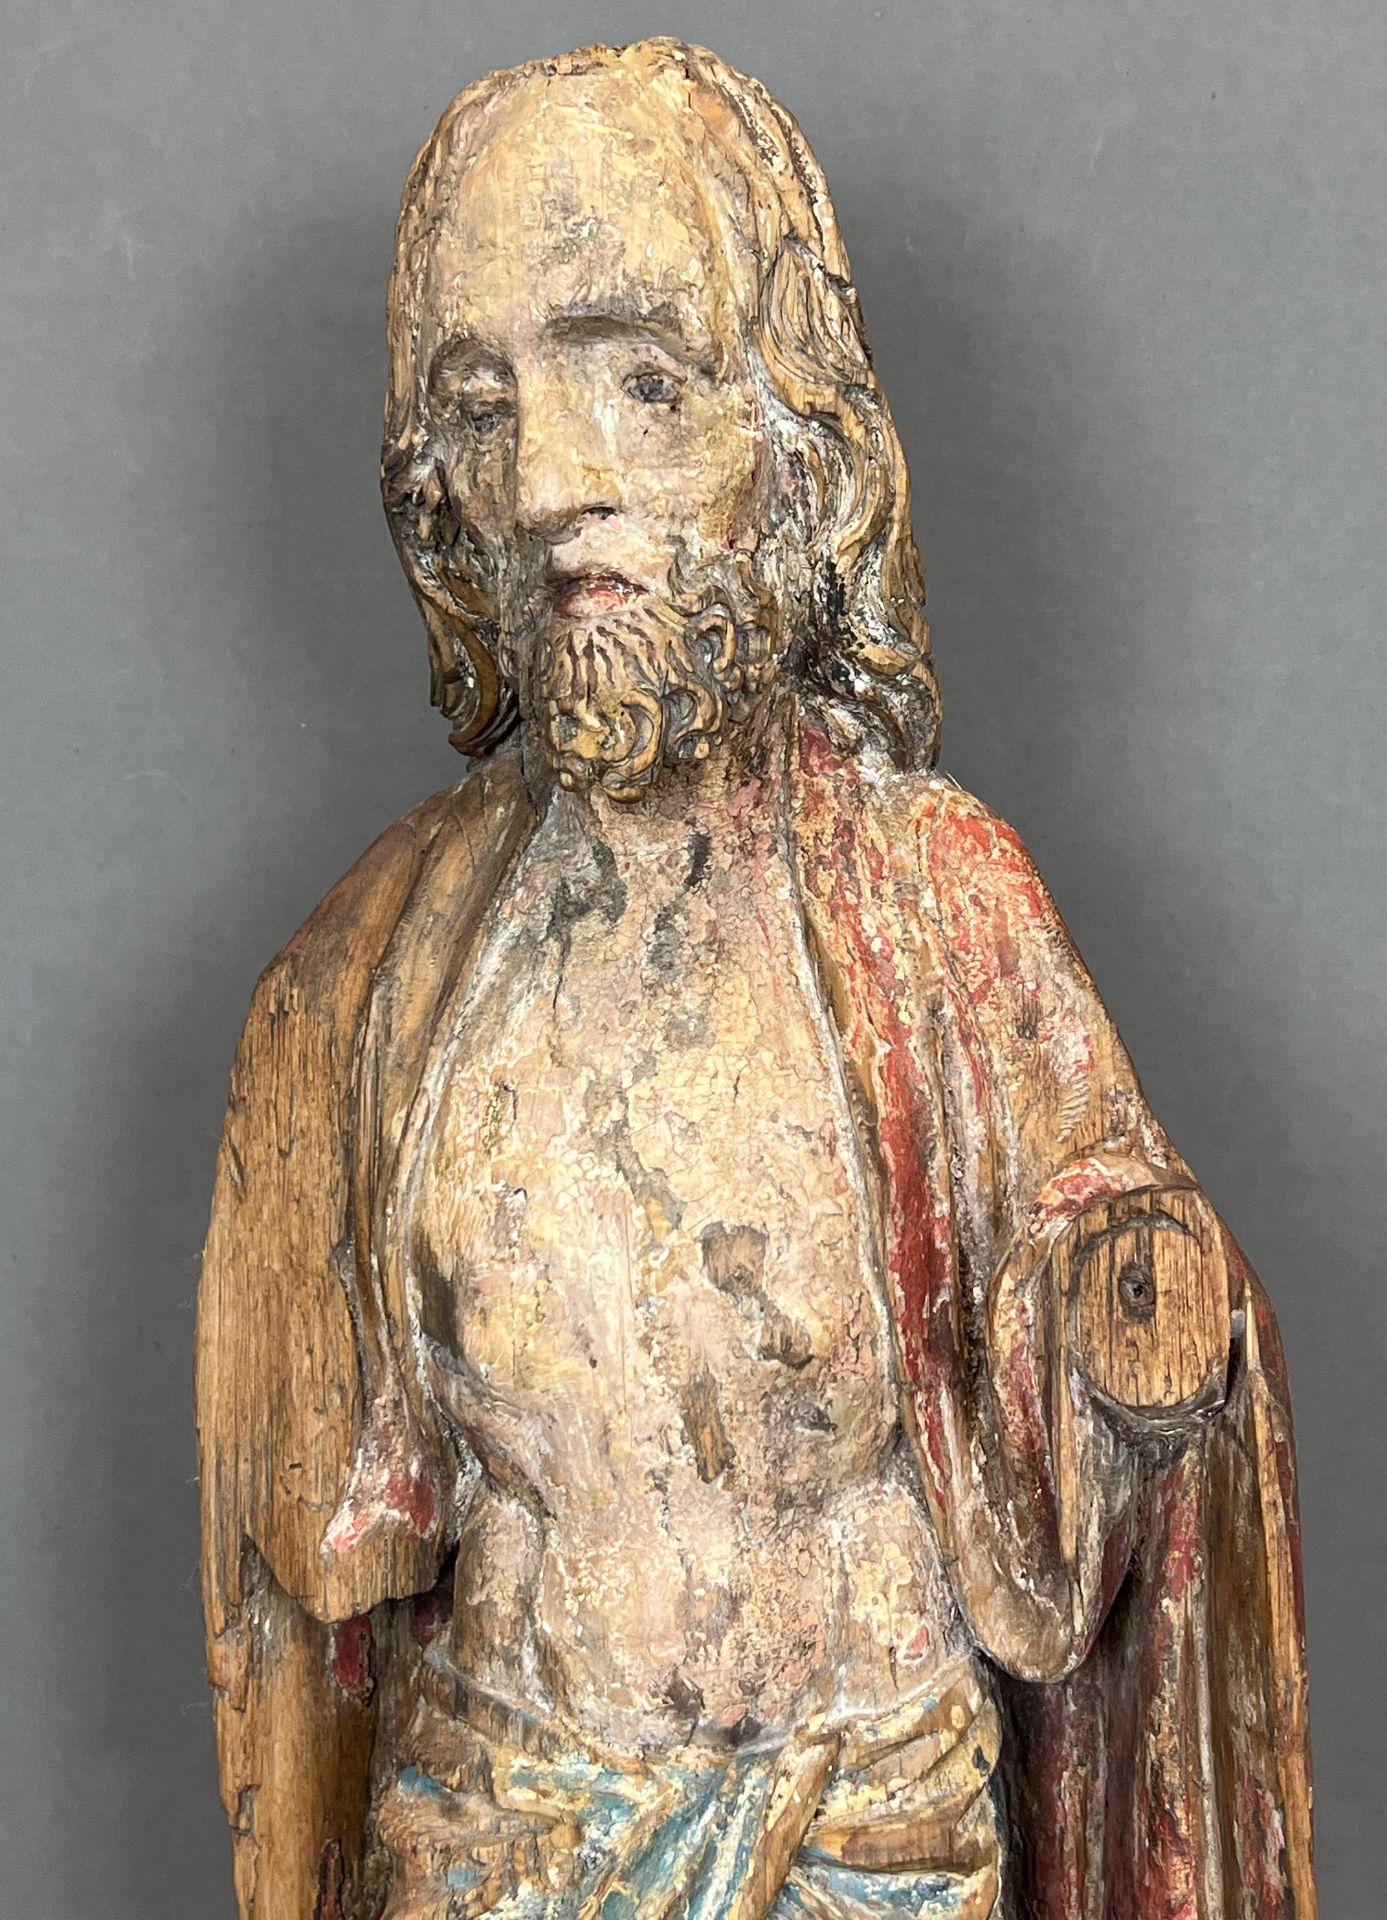 Wooden figure. Christ. Gothic style. Mid 15th century. Lower Rhine. - Image 2 of 15